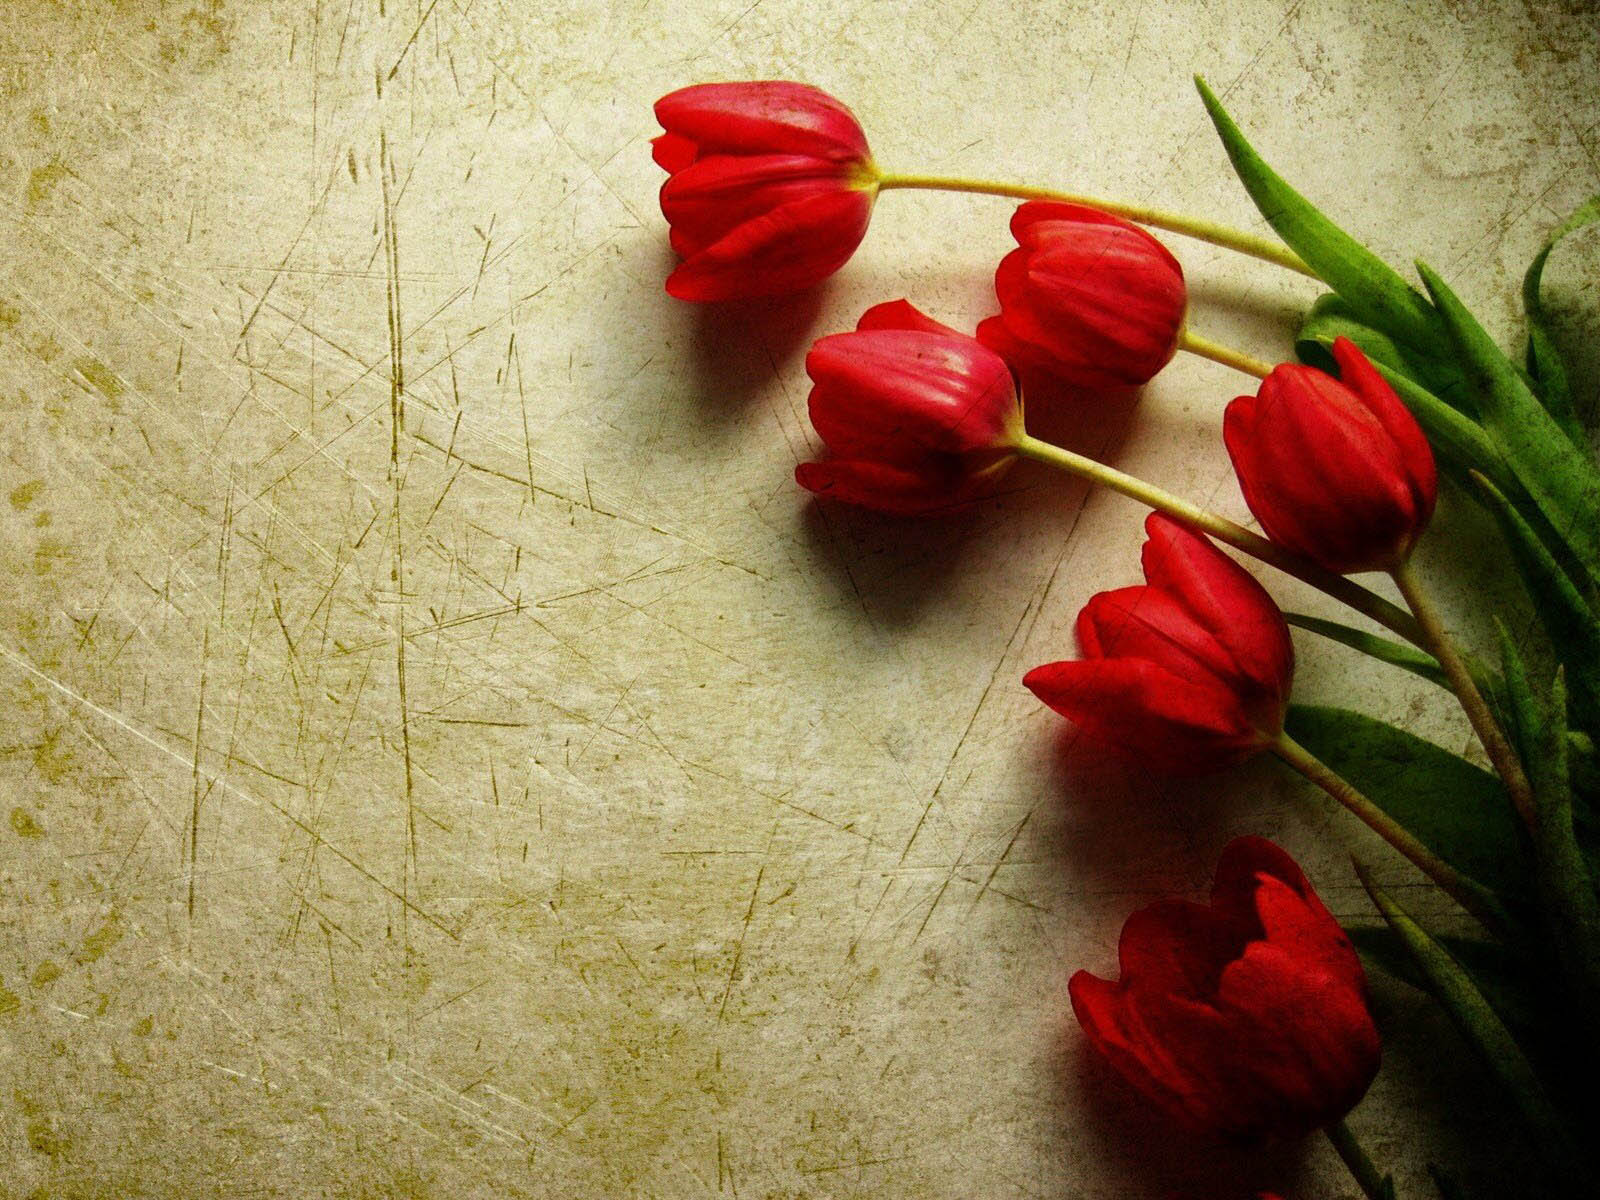 Tulips Wallpaper Image Photos Pictures And Background For